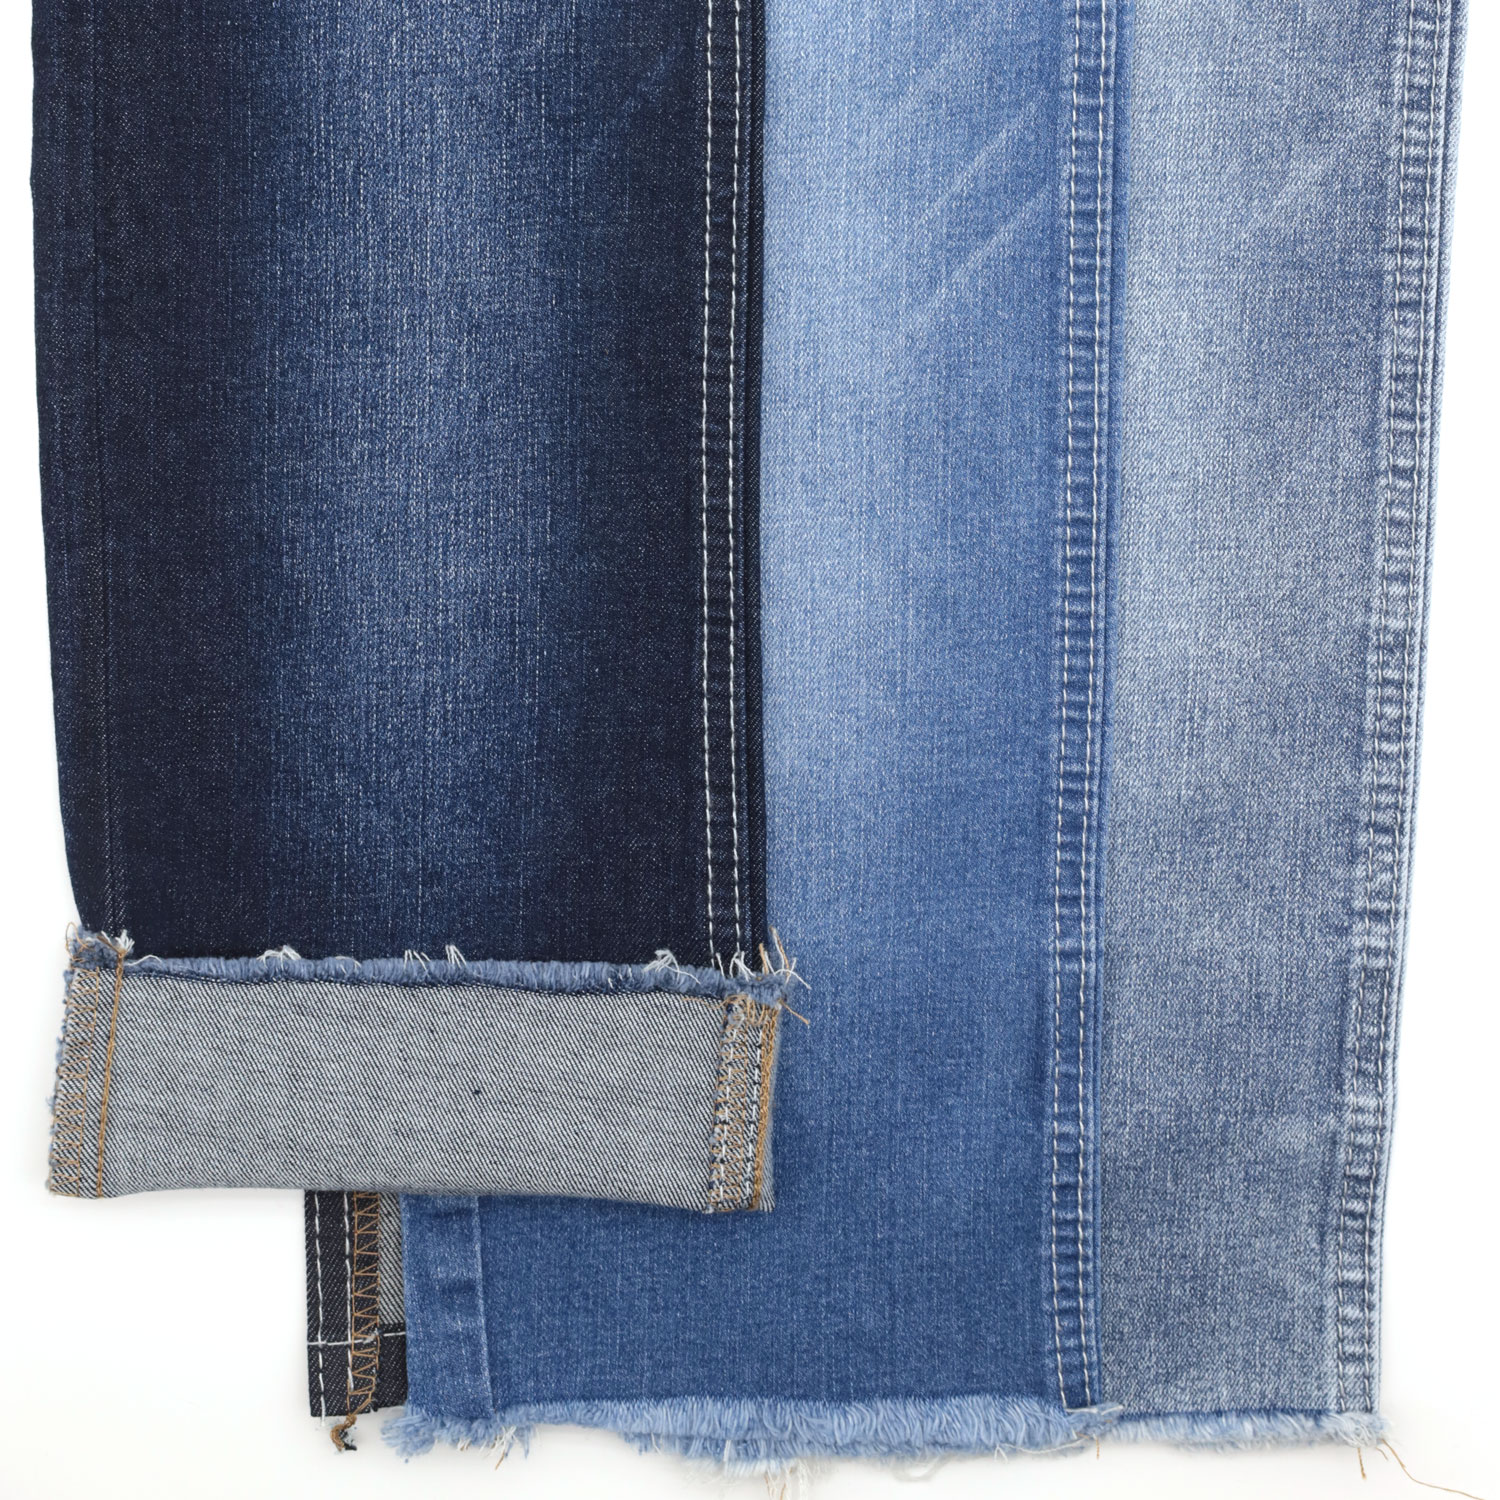 Why to Choose a Fabric Denim for Your Home 2